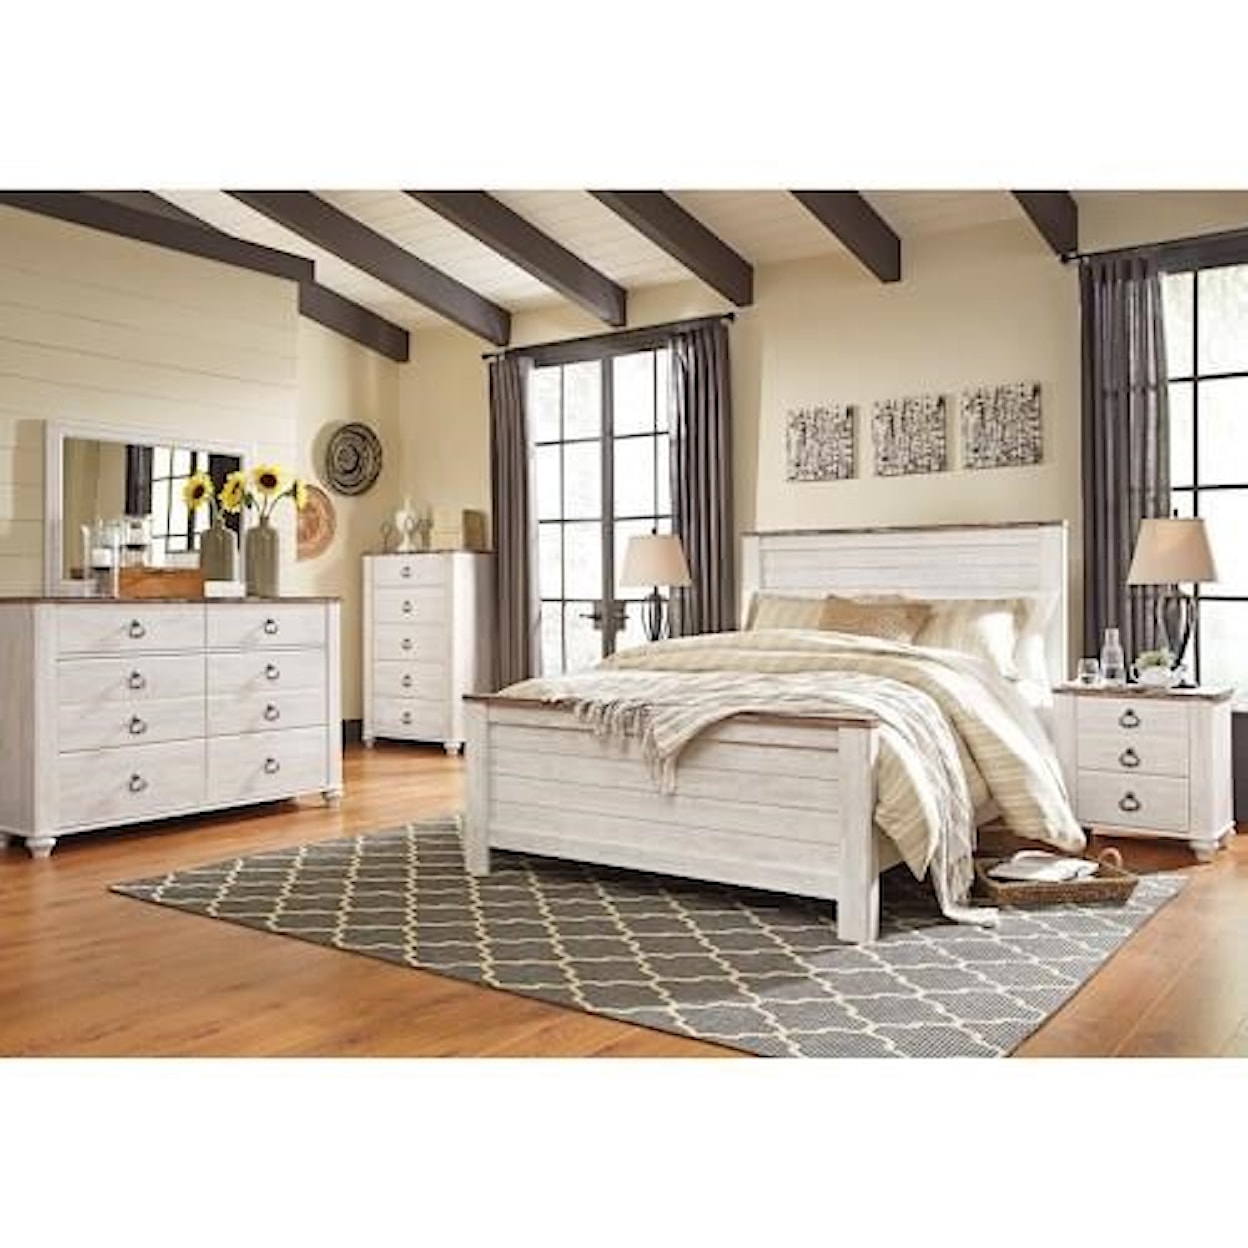 Signature Design by Ashley Willowton 5PC Queen Bedroom Set